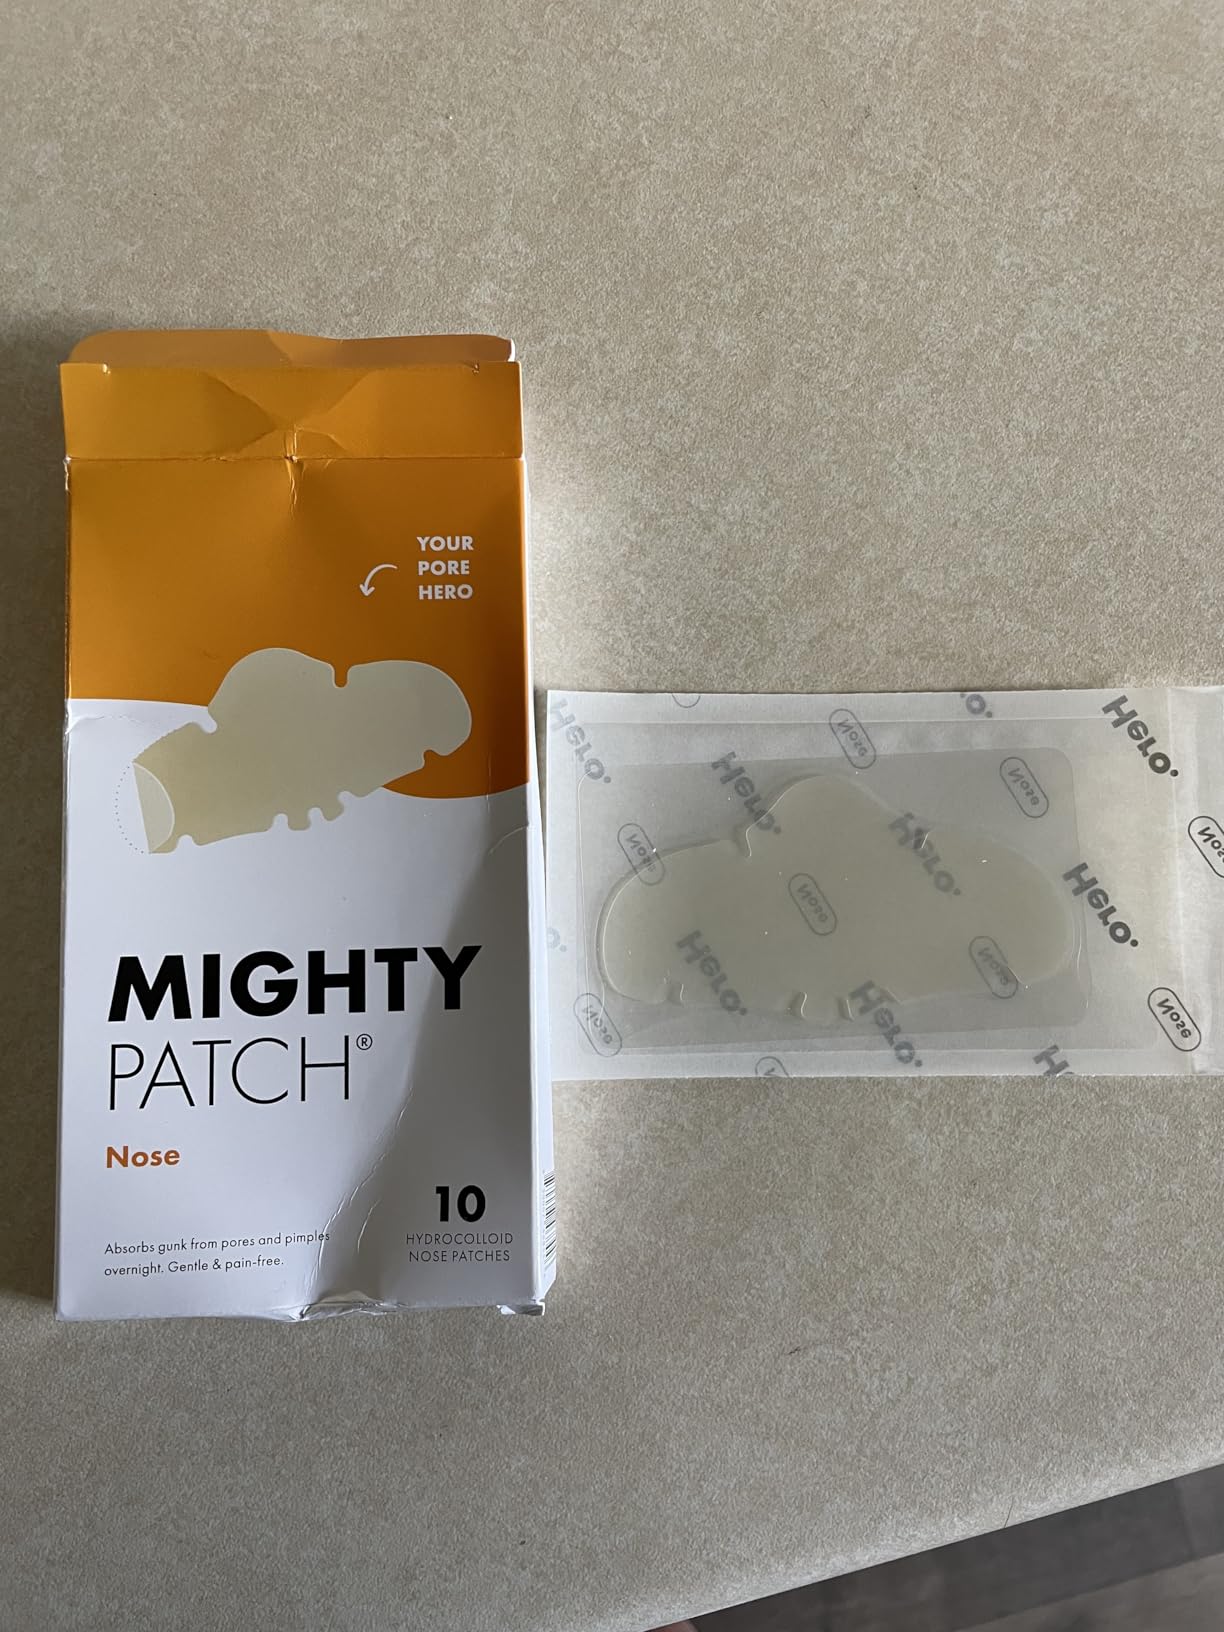 Mighty patch nose strip